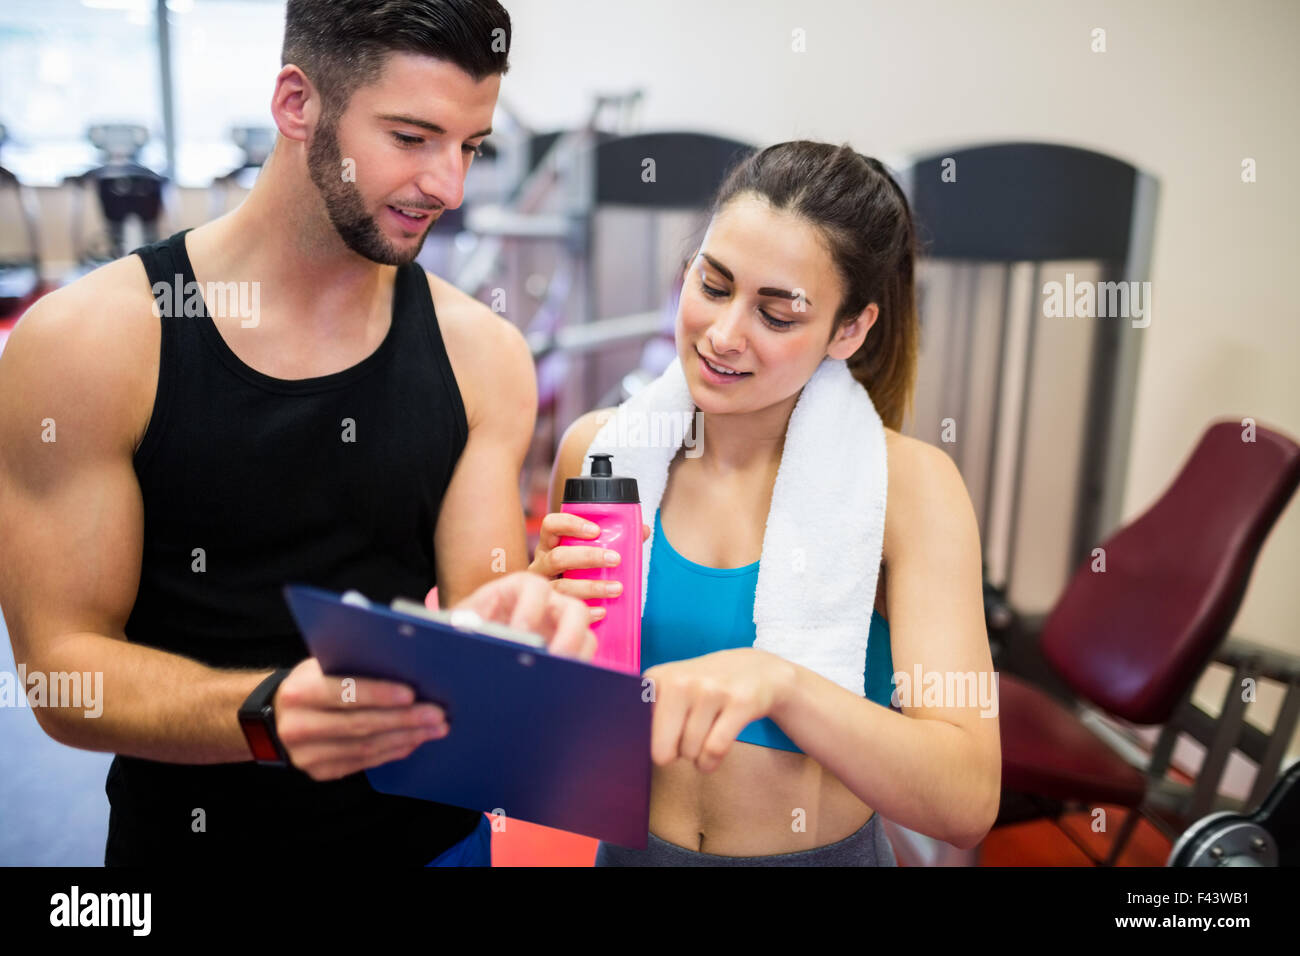 Trainer explaining workout regime to woman Stock Photo